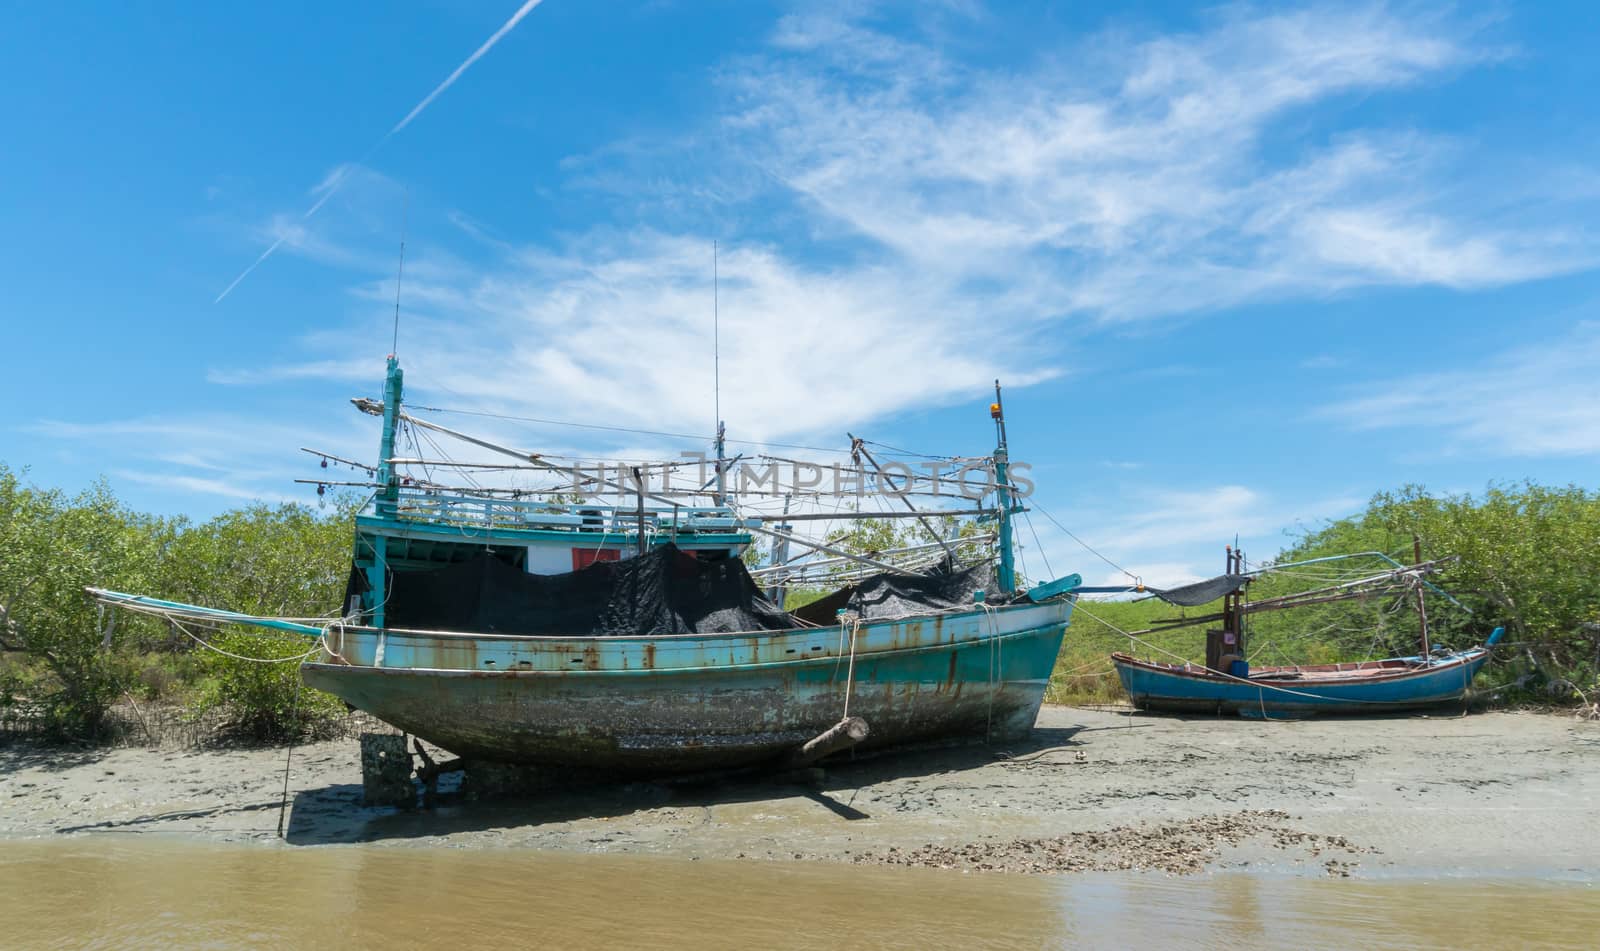 Old Fishing Boat on Khao Dang Canal at Prachuap Khiri Khan Thail by steafpong